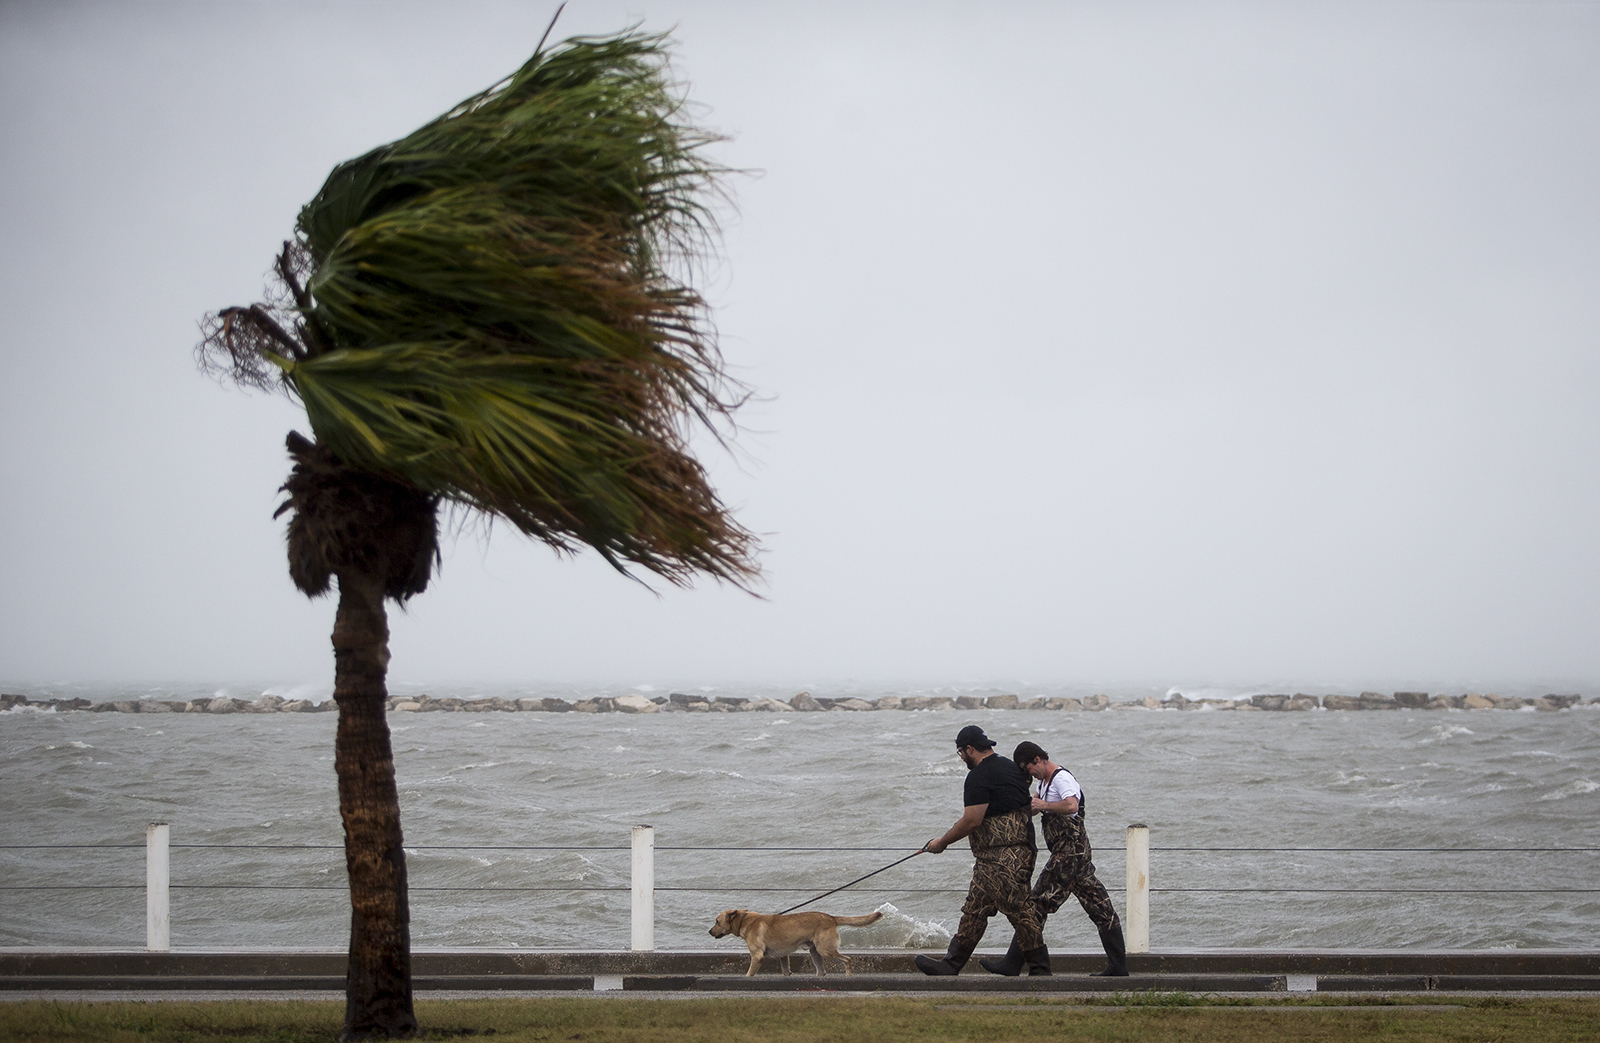 Foster Adams, left, walks his dog, Gus, with his friend Bradley Strayer along the seawall during Hurricane Harvey in Corpus Christi, Texas, on Friday, Aug. 25, 2017. Hurricane Harvey is expected to make landfall on the Texas coast Friday night or early Saturday morning. (Nick Wagner/Austin American-Statesman via AP)